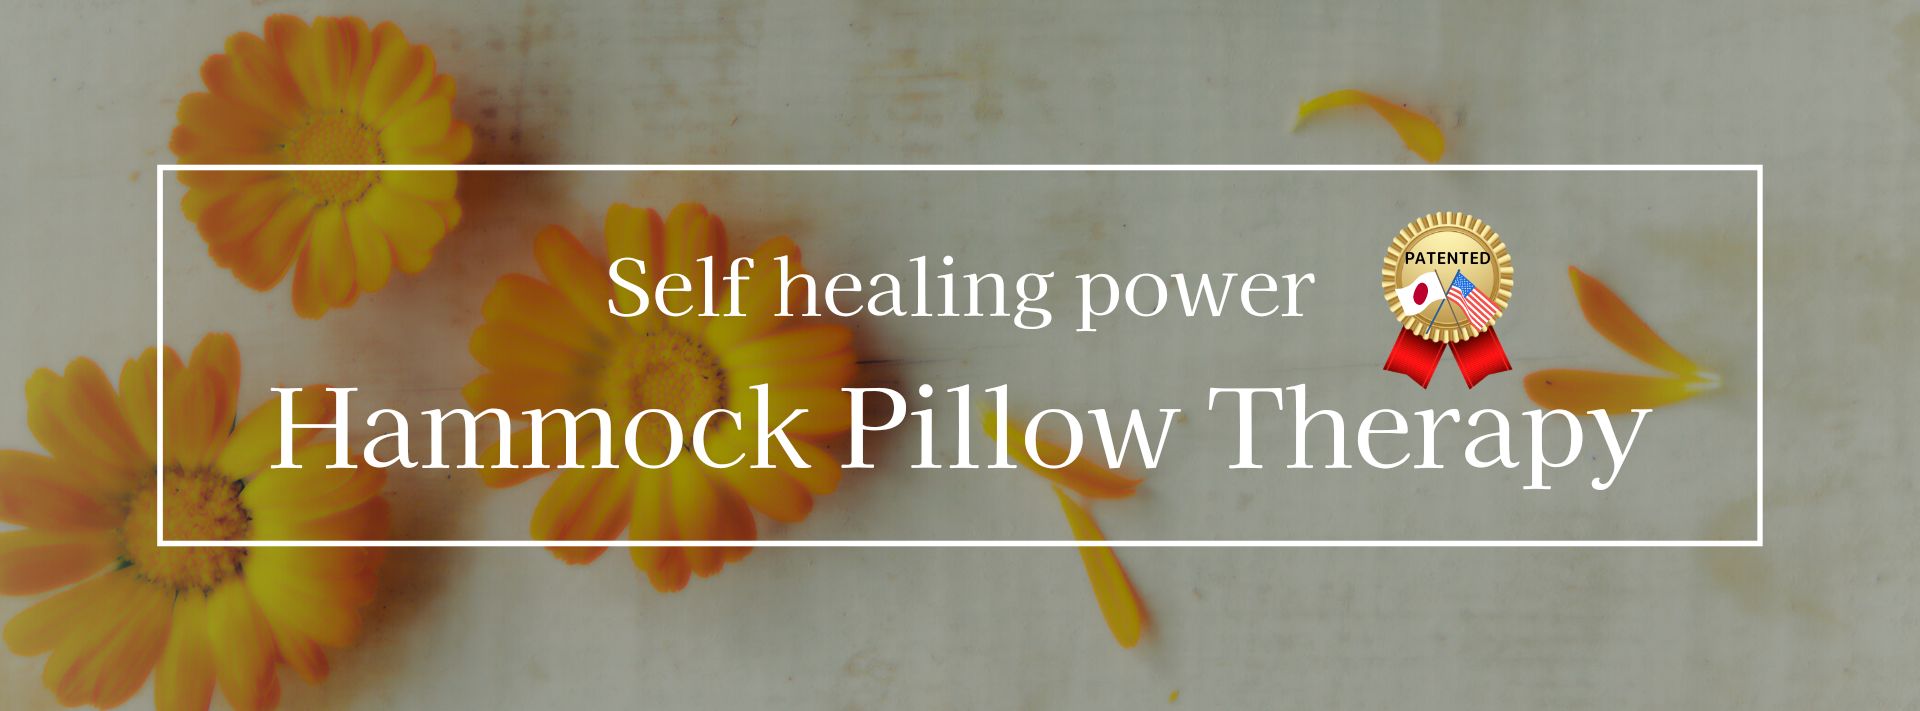 What is Hammock Pillow Therapy?